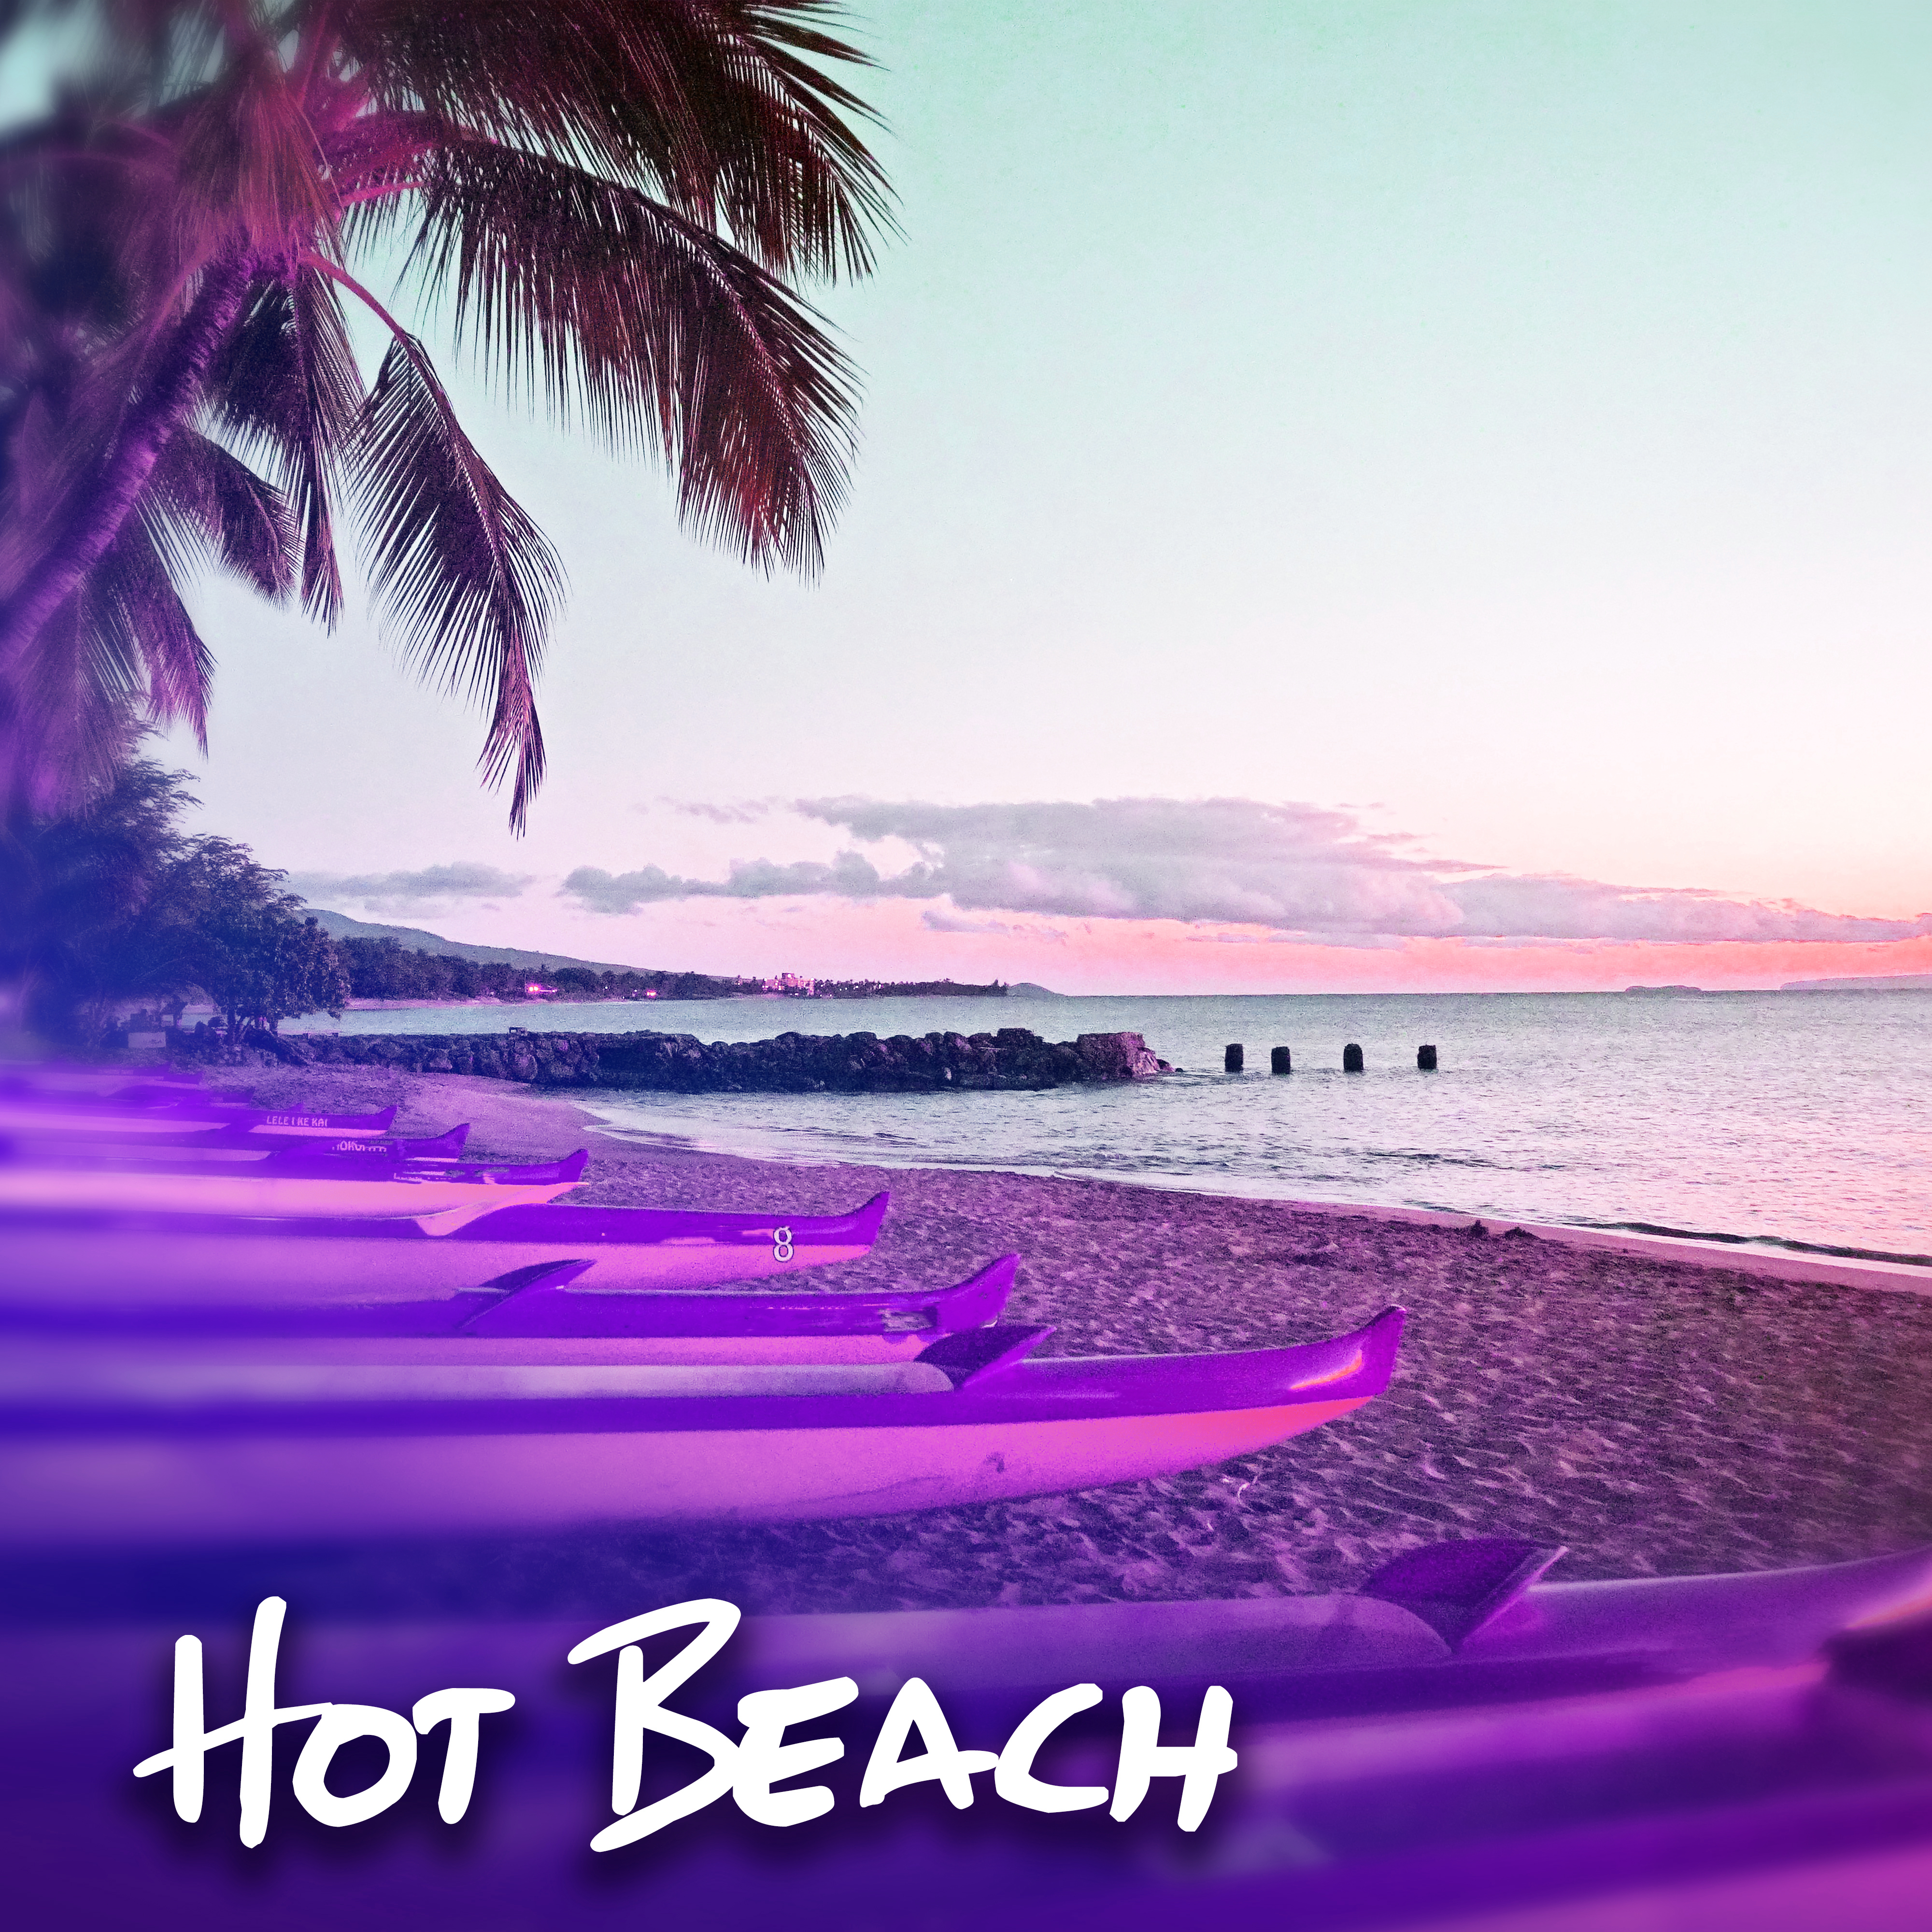 Hot Beach – Ibiza Dance Party, Electronic Music, Relax, Summertime, Holiday Chill Out Music, Ibiza Lounge